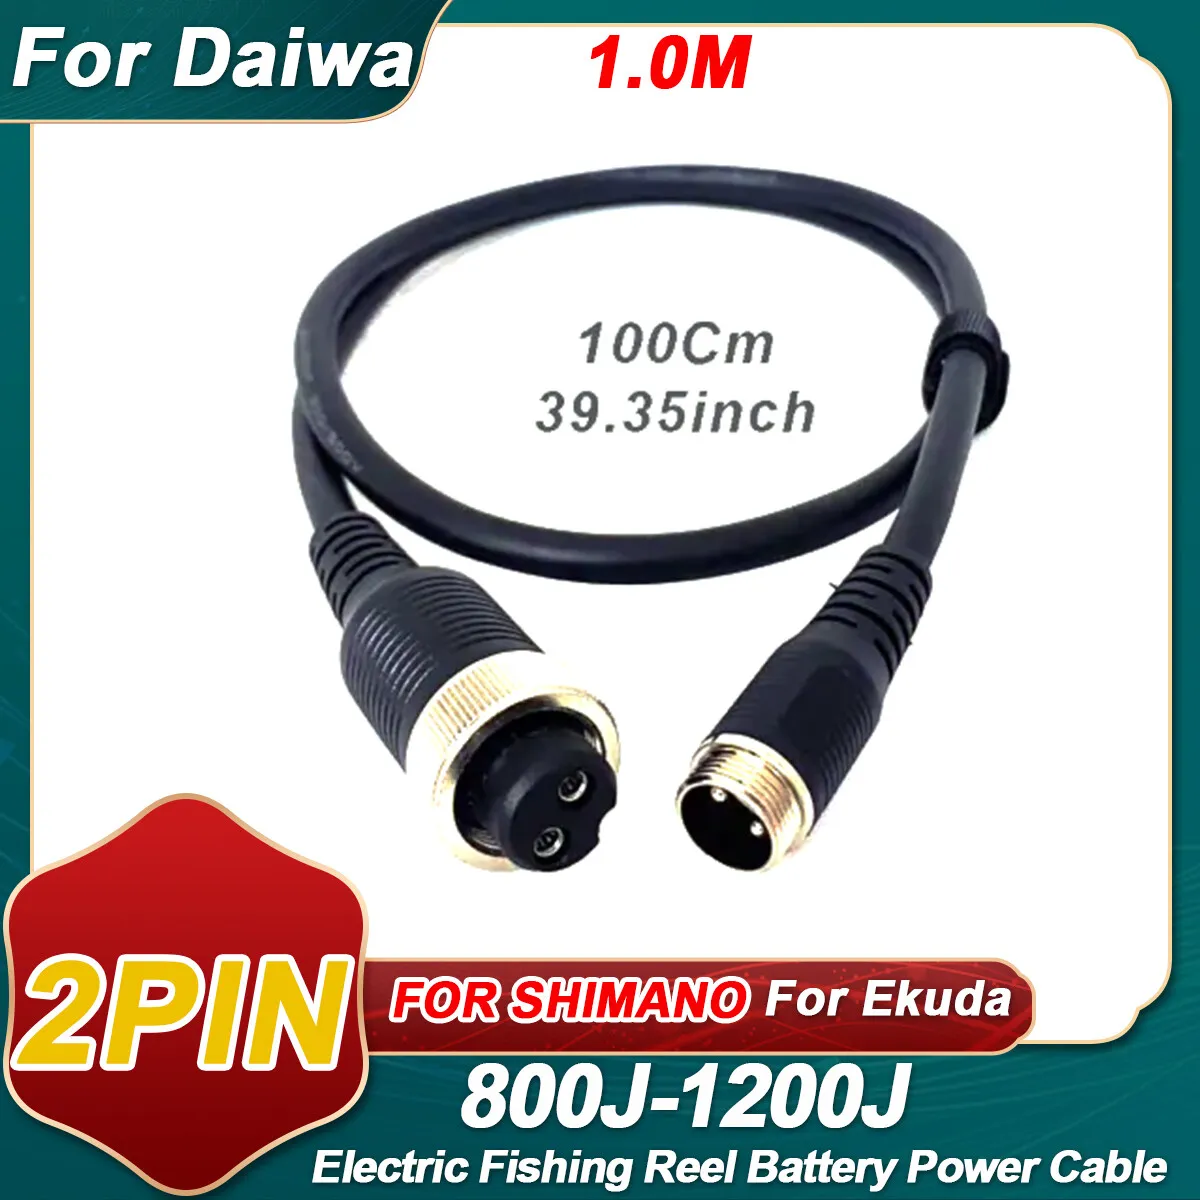 1.0m Power Cable for Daiwa 1200mj 1200J 800mj 800mjs Electric Reel Cord 2-Pin Genuine